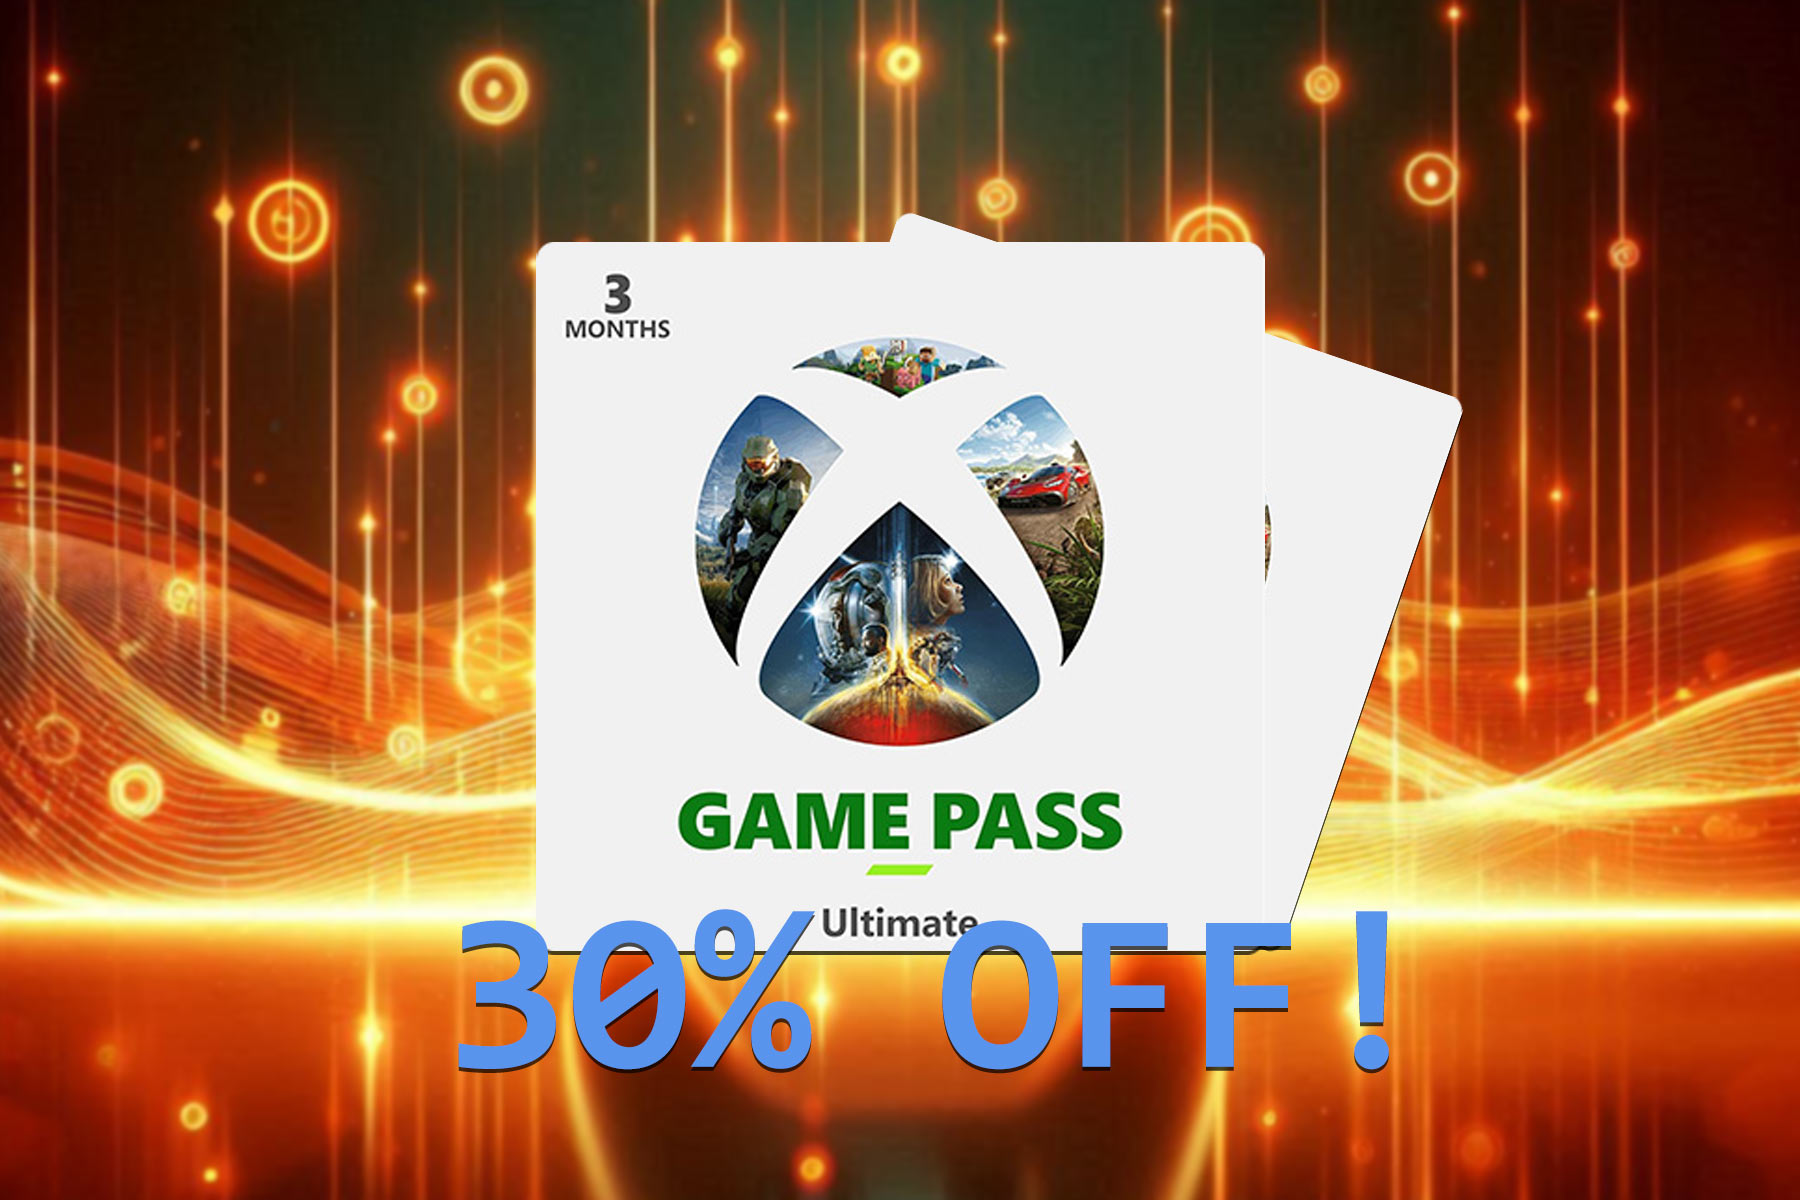 xbox game pass ultimate discount 30